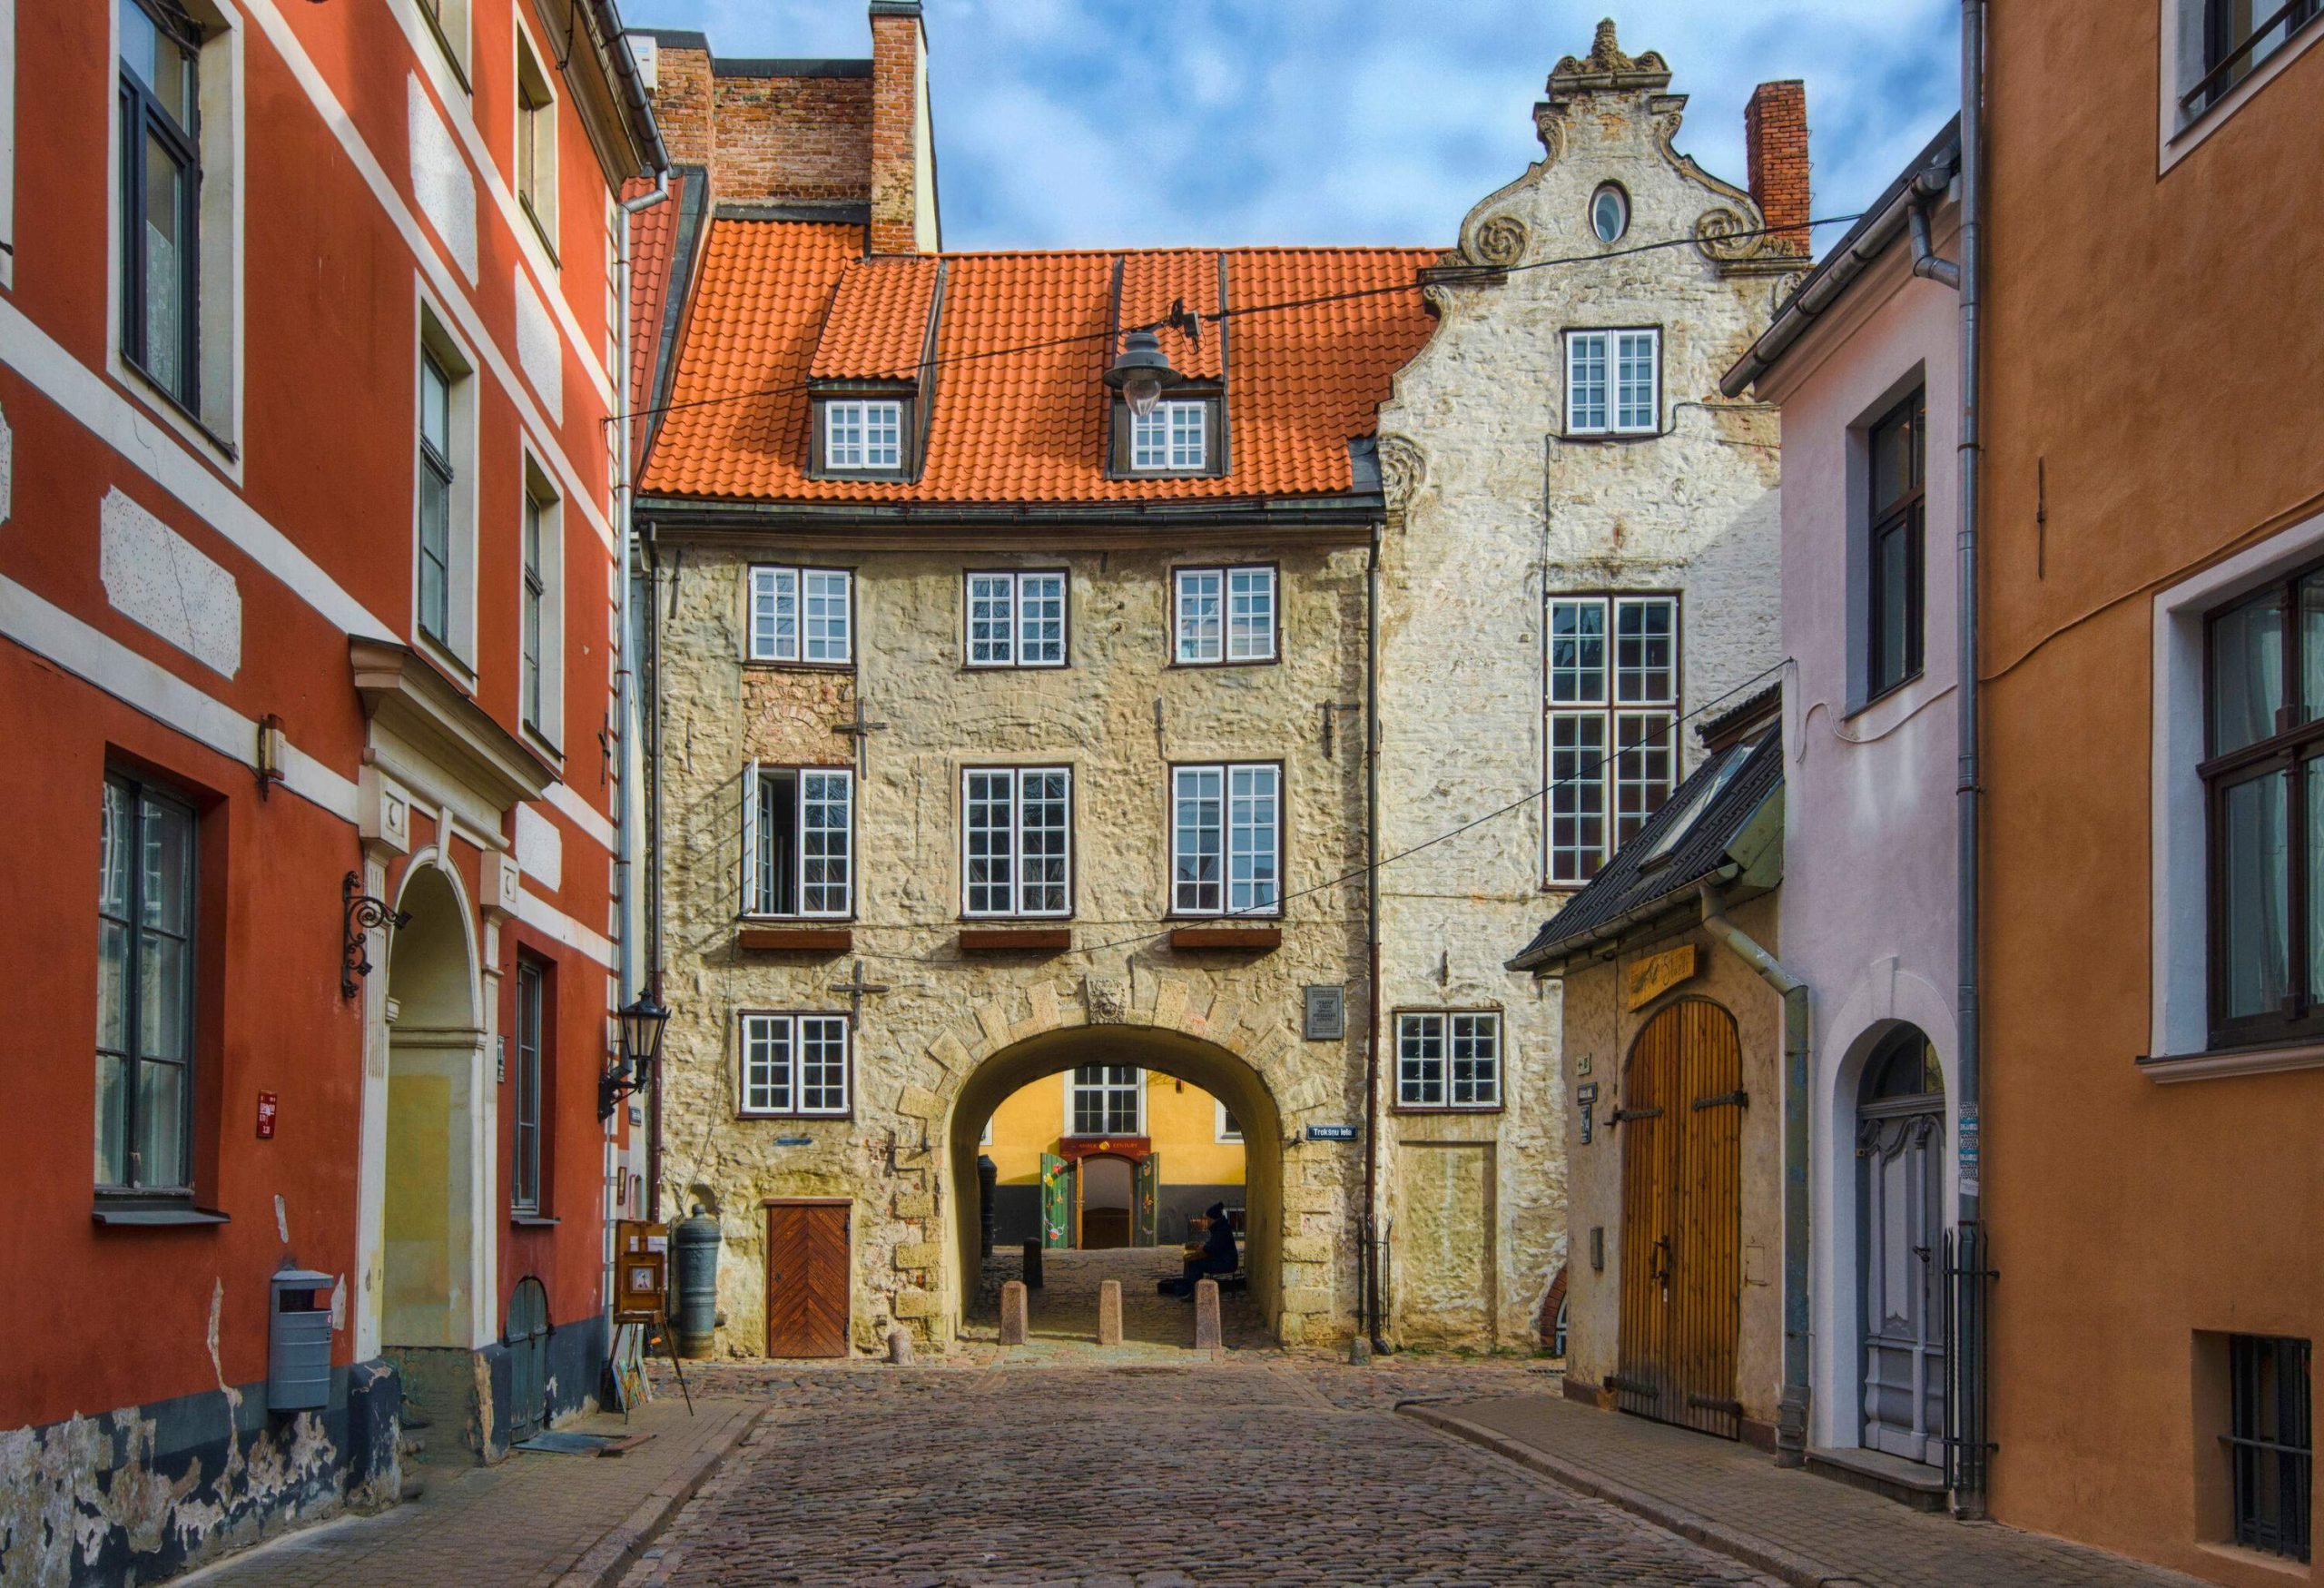 Historic buildings with arched doorways surrounding a cobblestone path in an old village.